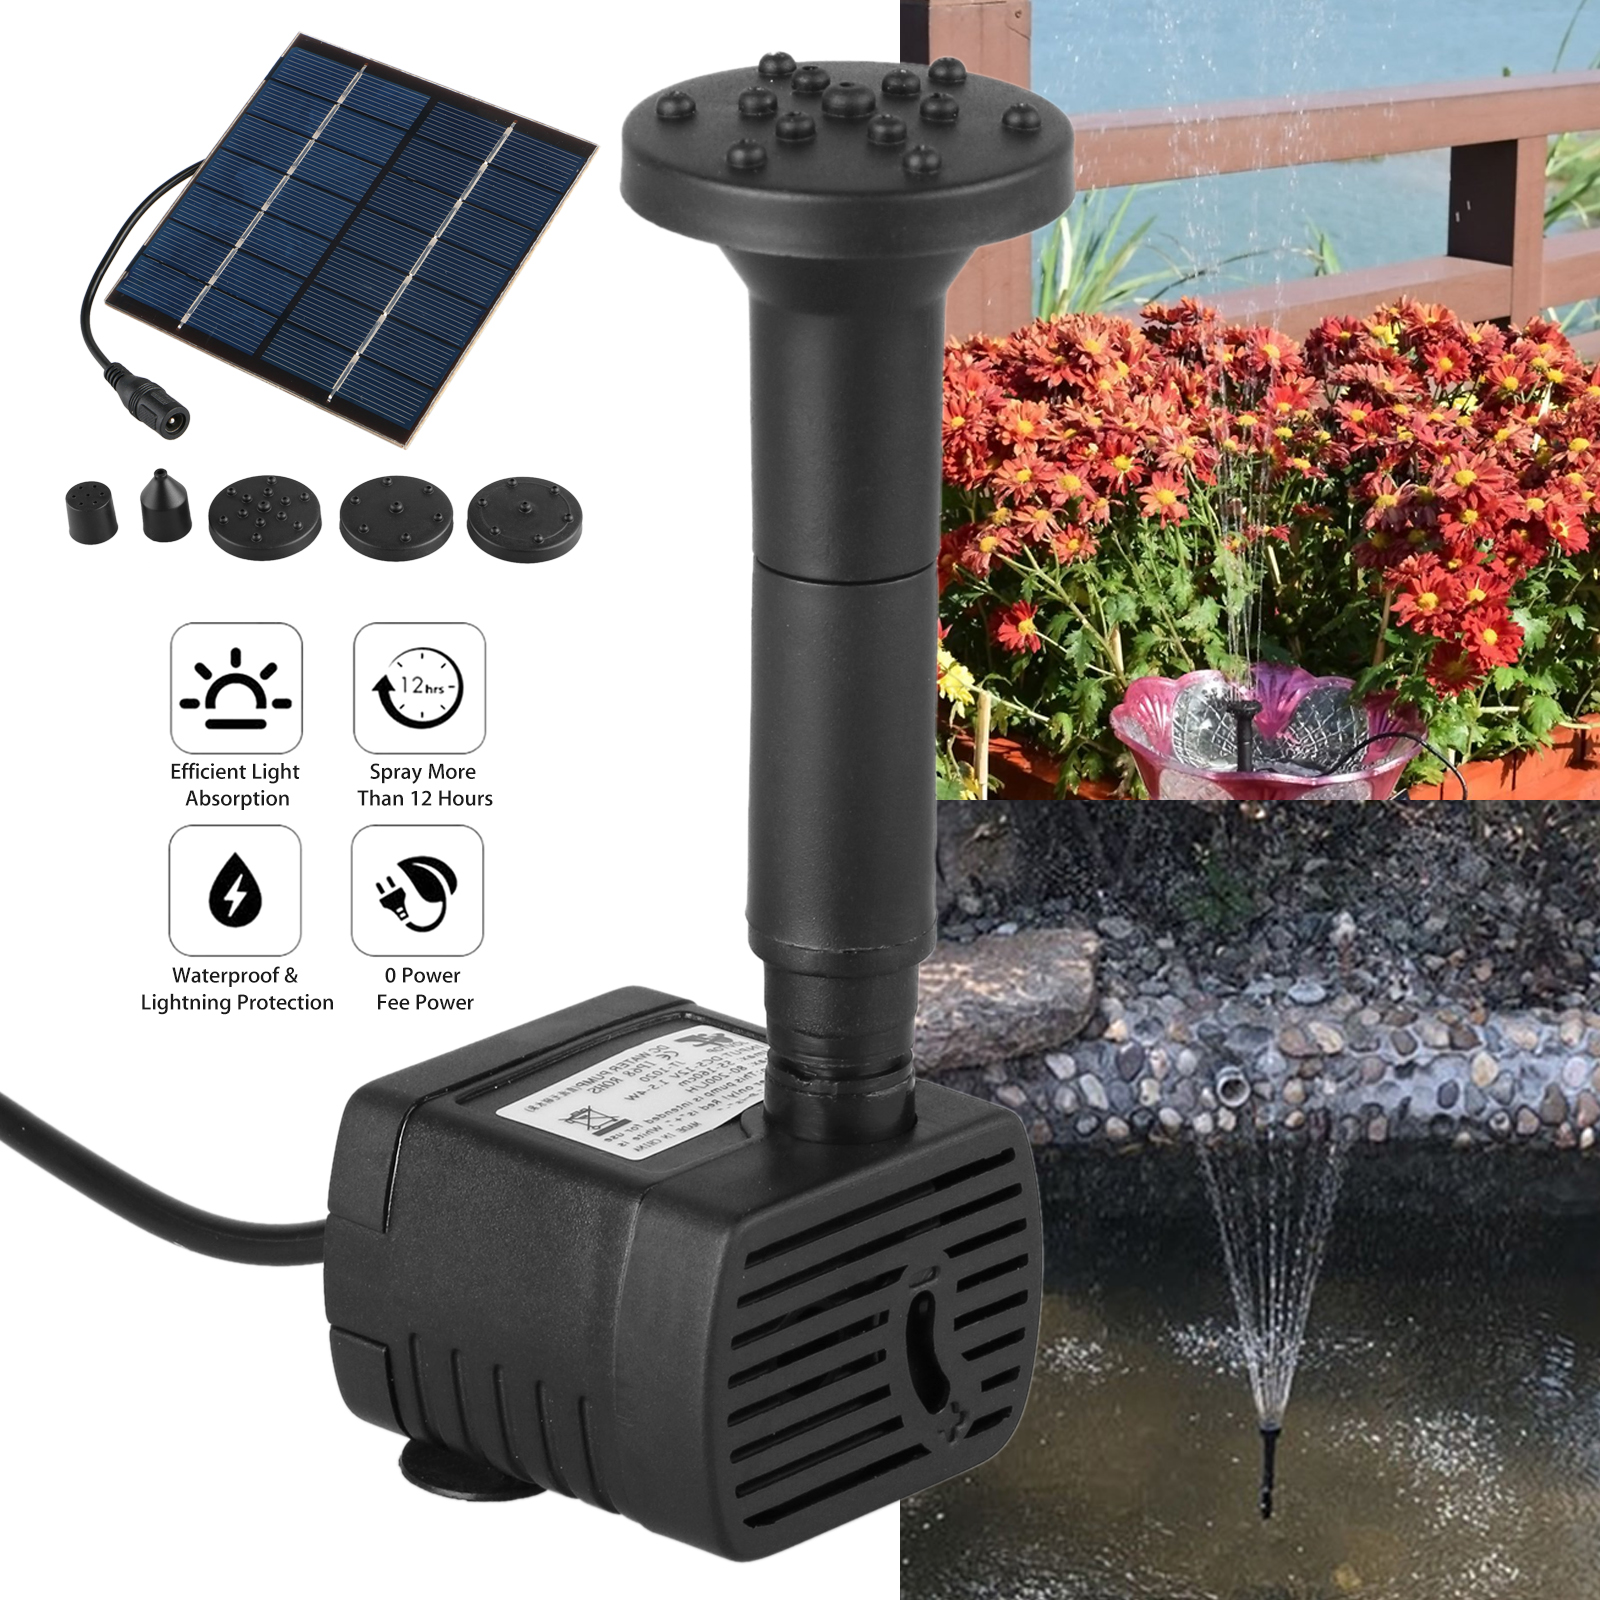 Solar Power Fountain Submersible Water Pump With Filter Panel Pond Pool 150L/h eBay